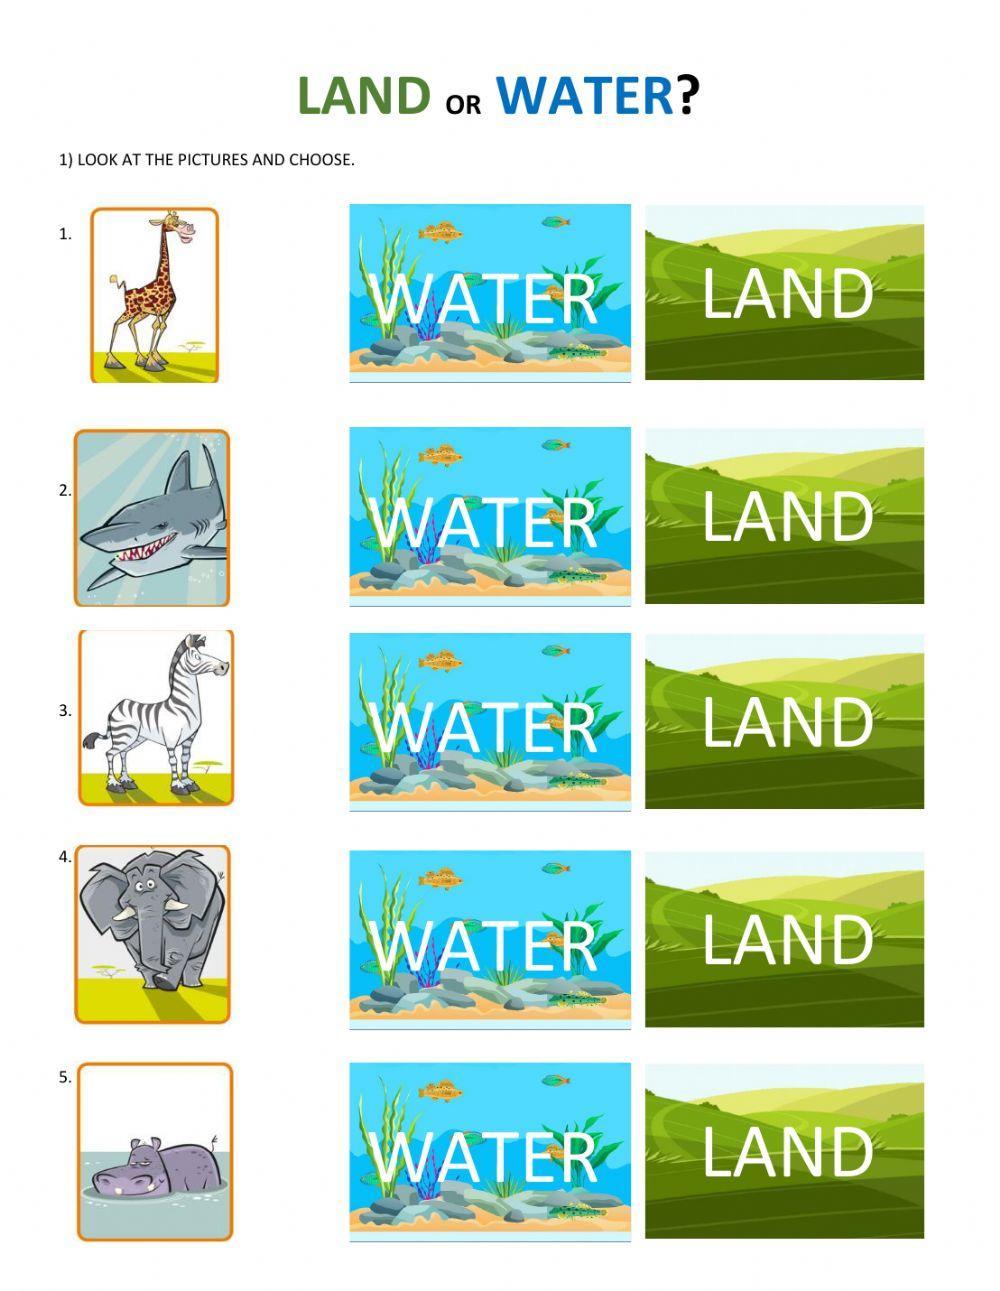 Land or water